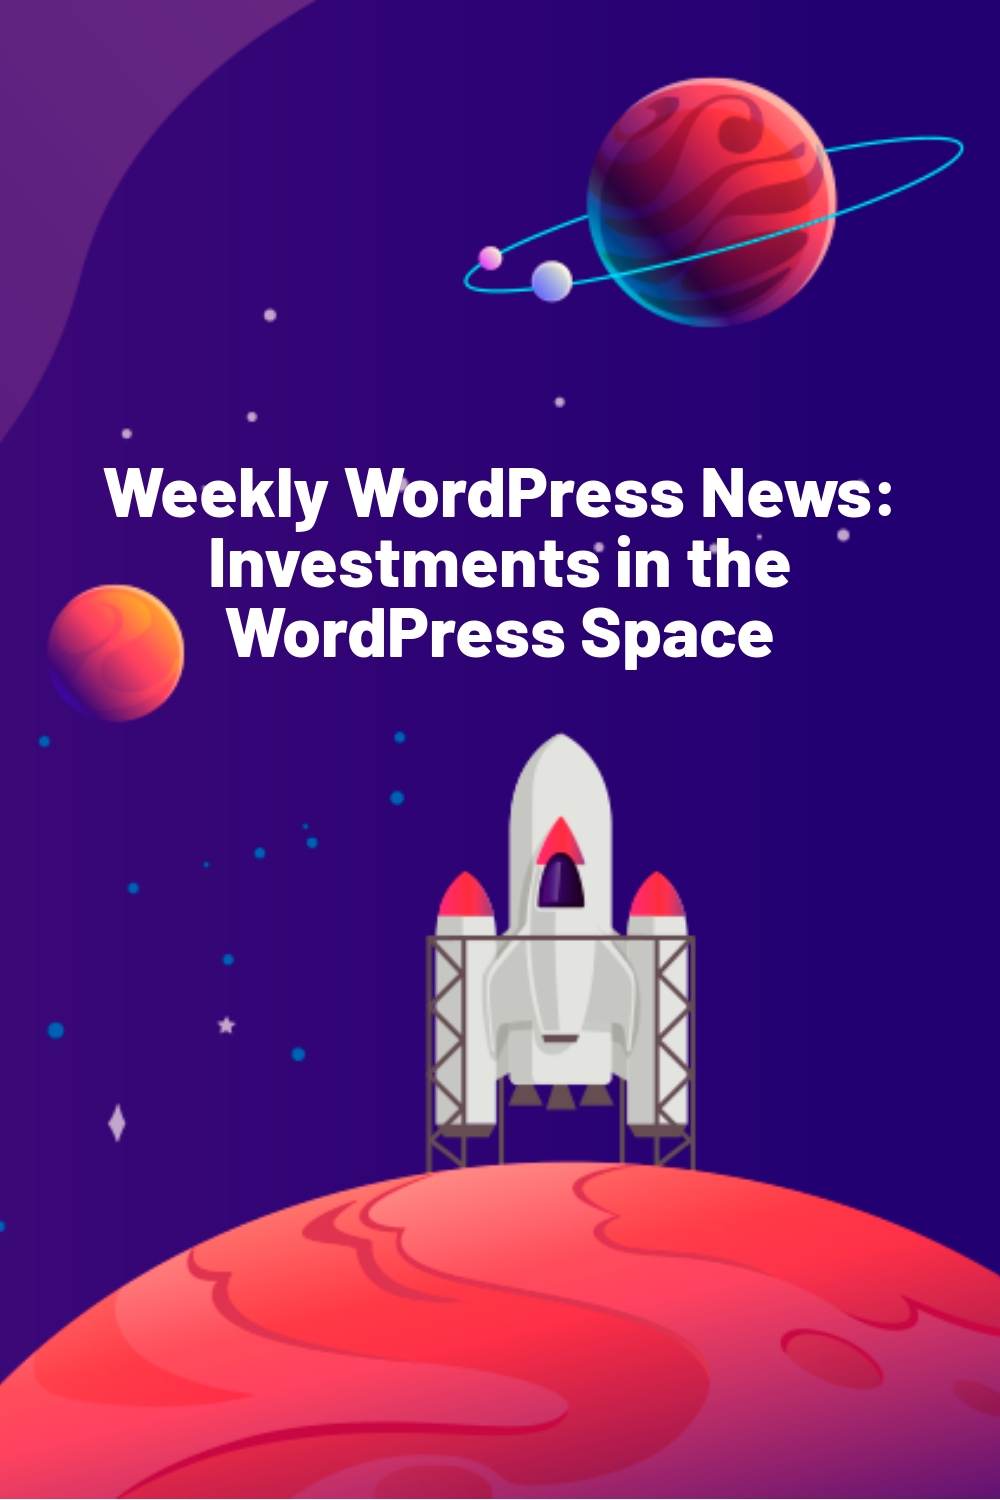 Weekly WordPress News:  Investments in the WordPress Space